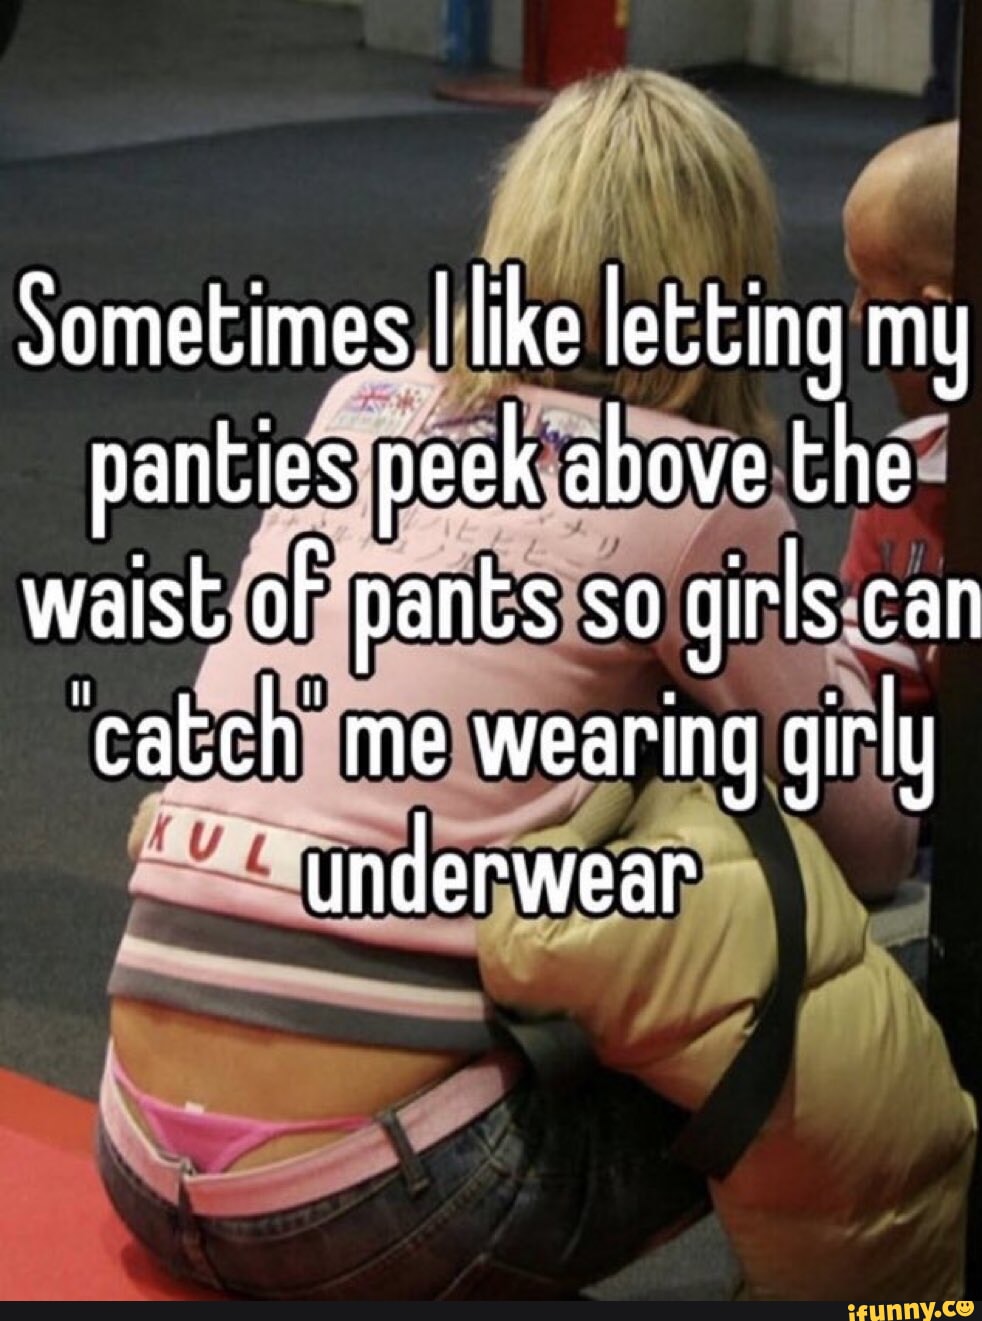 Sometimes I like letting my panties peek above the waist of pants so girls  can catch me wearing girly underwear - iFunny